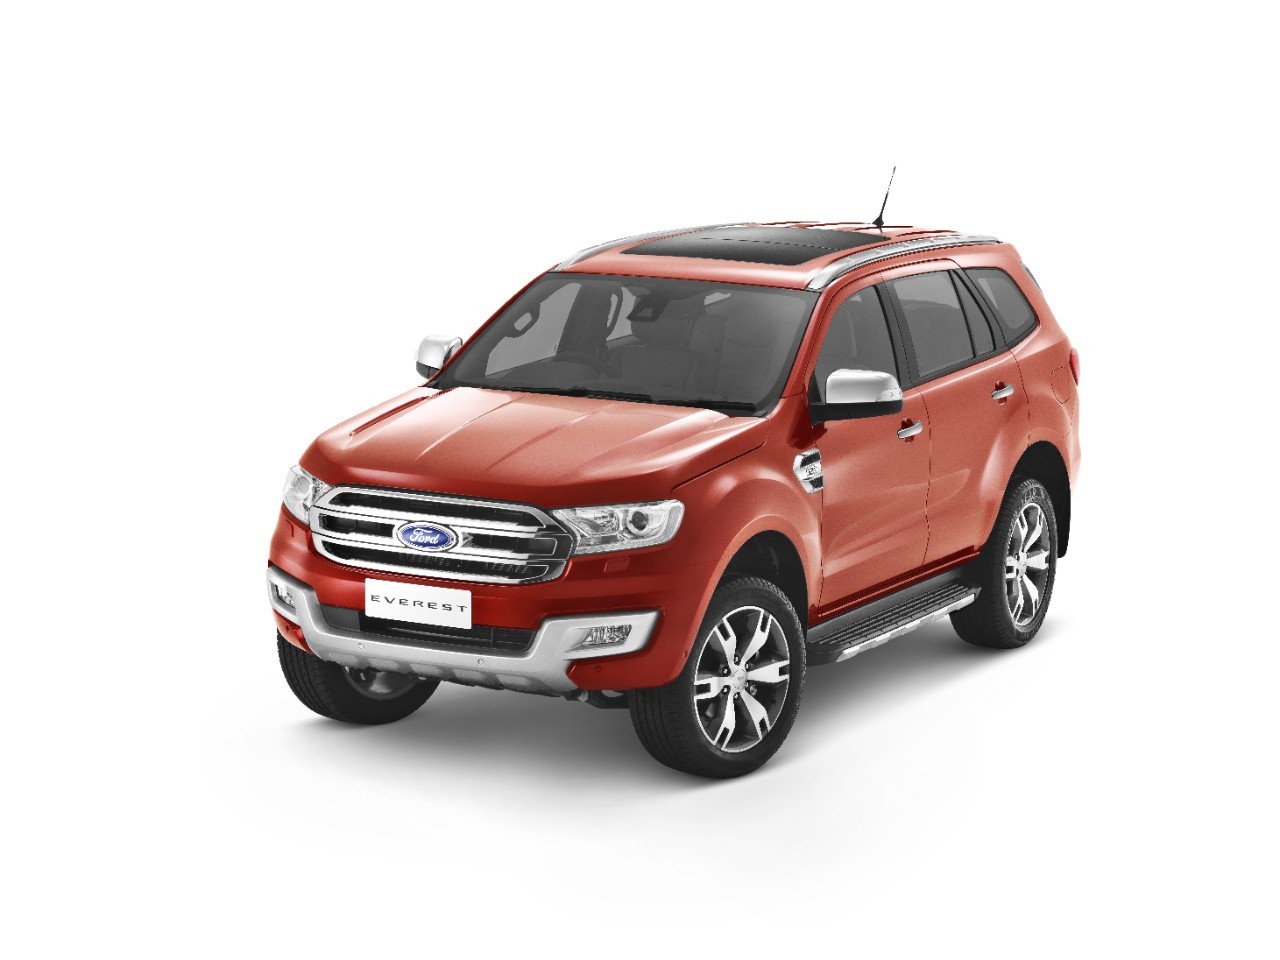 2015 Ford Everest Debuts in Thailand, Will Be Manufactured in Rayong ...